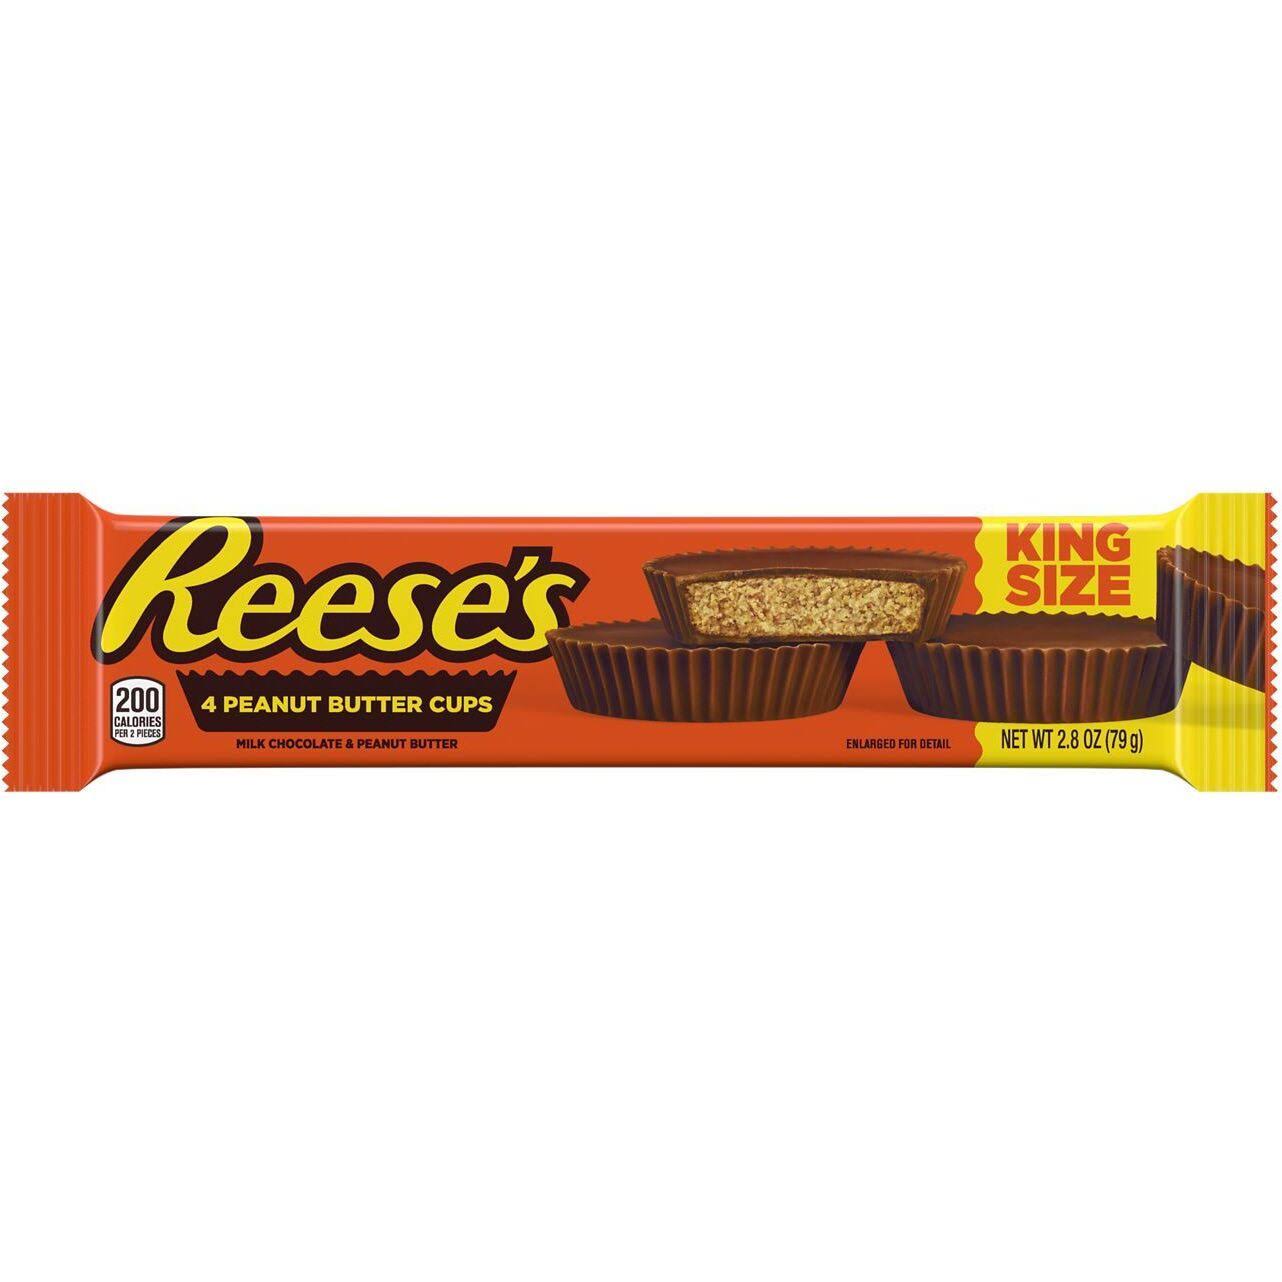 Reese's King Size Peanut Butter Cup - 4pk, 79g